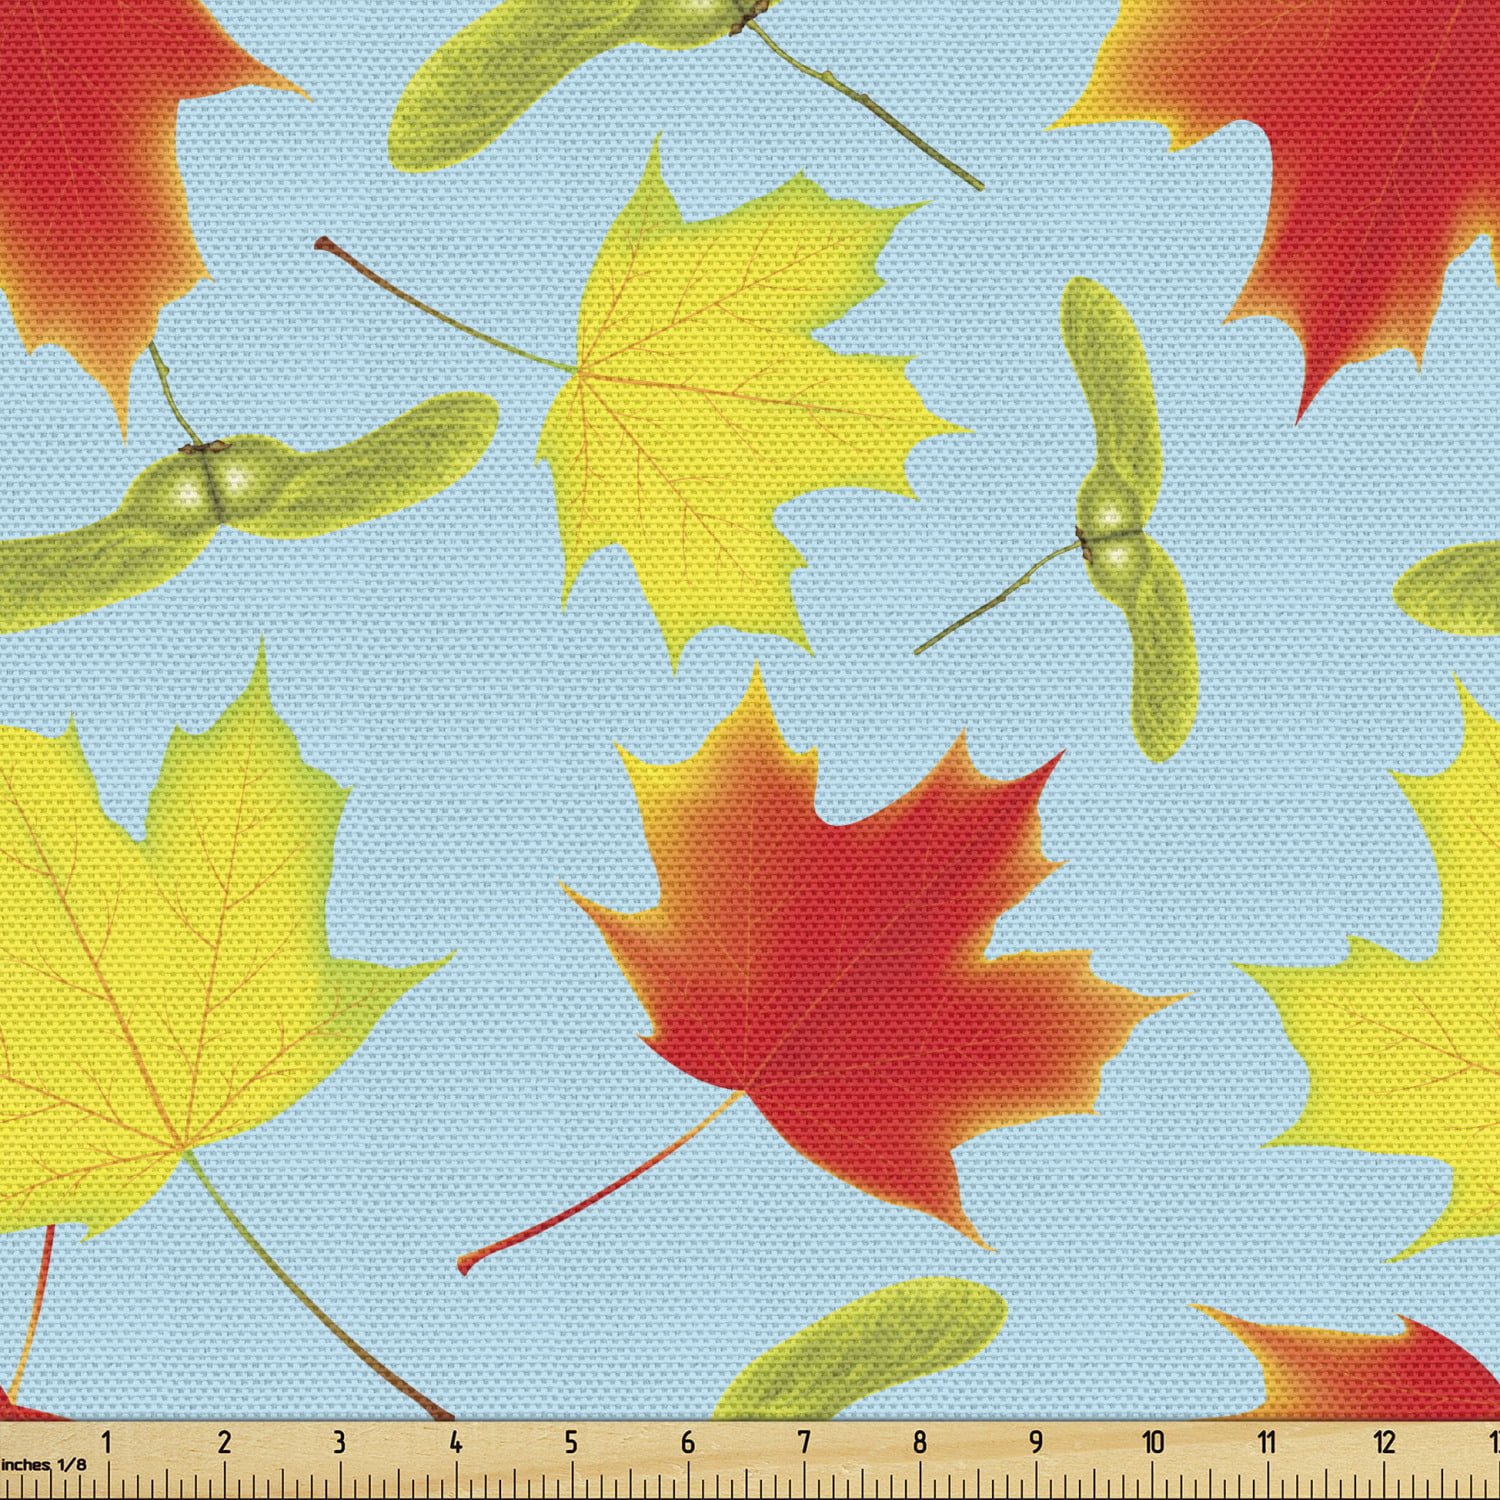 Autumn Fabric by the Yard Upholstery, Oak Poplar Beech Maple Aspen and  Horse Chestnut Leaves, Decorative Fabric for DIY and Home Accents,  Champagne Dark Salmon by Ambesonne